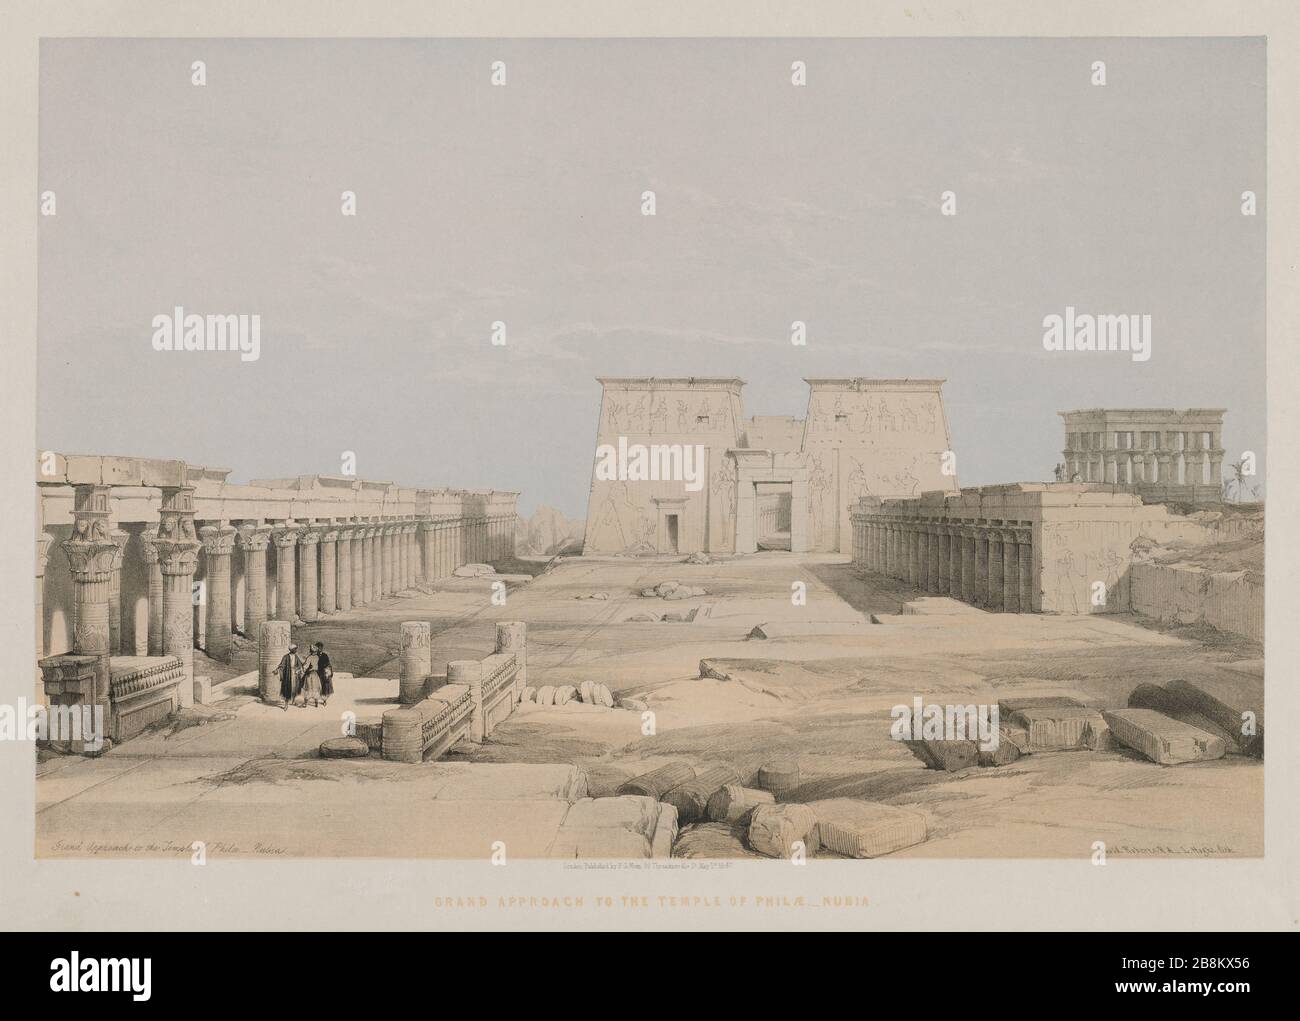 Egypt and Nubia, Volume I: Grand Approach to the Temple of Philae, Nubia, 1847. Louis Haghe (British, 1806-1885), F.G.Moon, 20 Threadneedle Street, London, after David Roberts (British, 1796-1864). Color lithograph Stock Photo